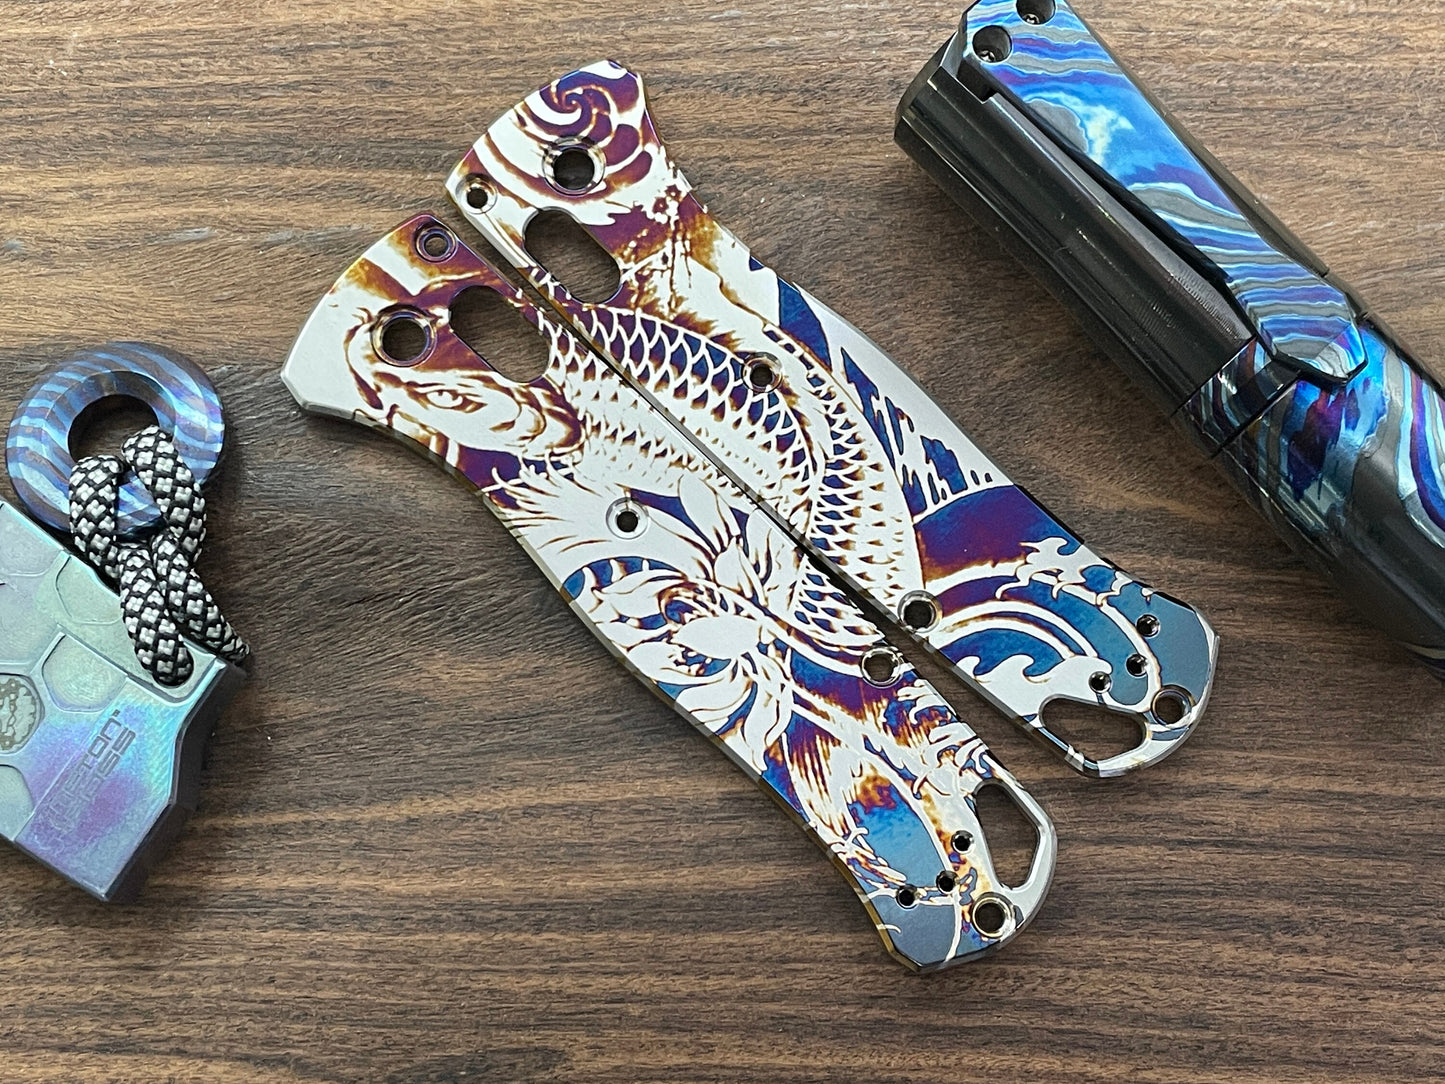 KOI Fish heat ano engraved Titanium Scales for Benchmade Bugout 535